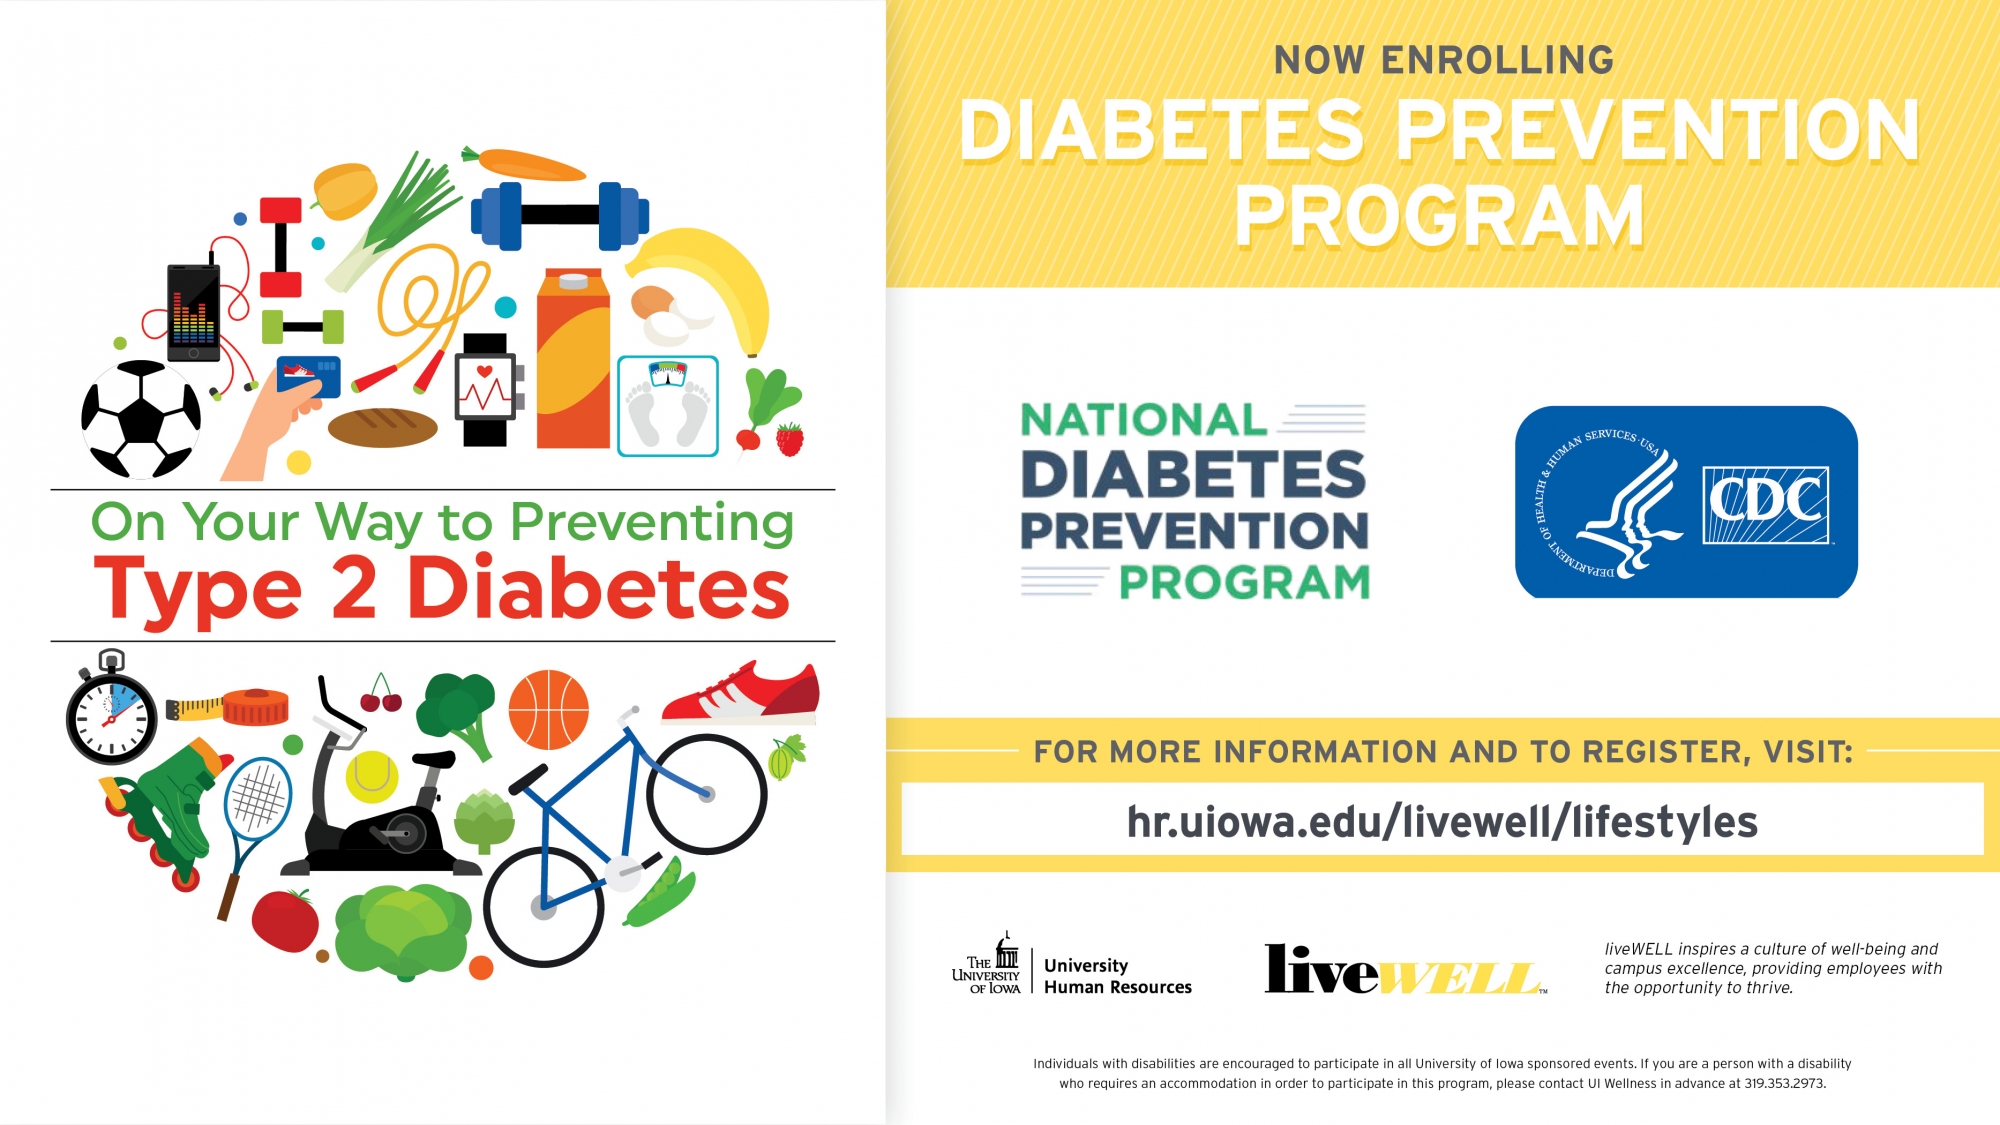 Now Enrolling Diabetes Prevention Program. For more information and to regsiter, visit: hr.uiowa.edu/livewell/lifestyles